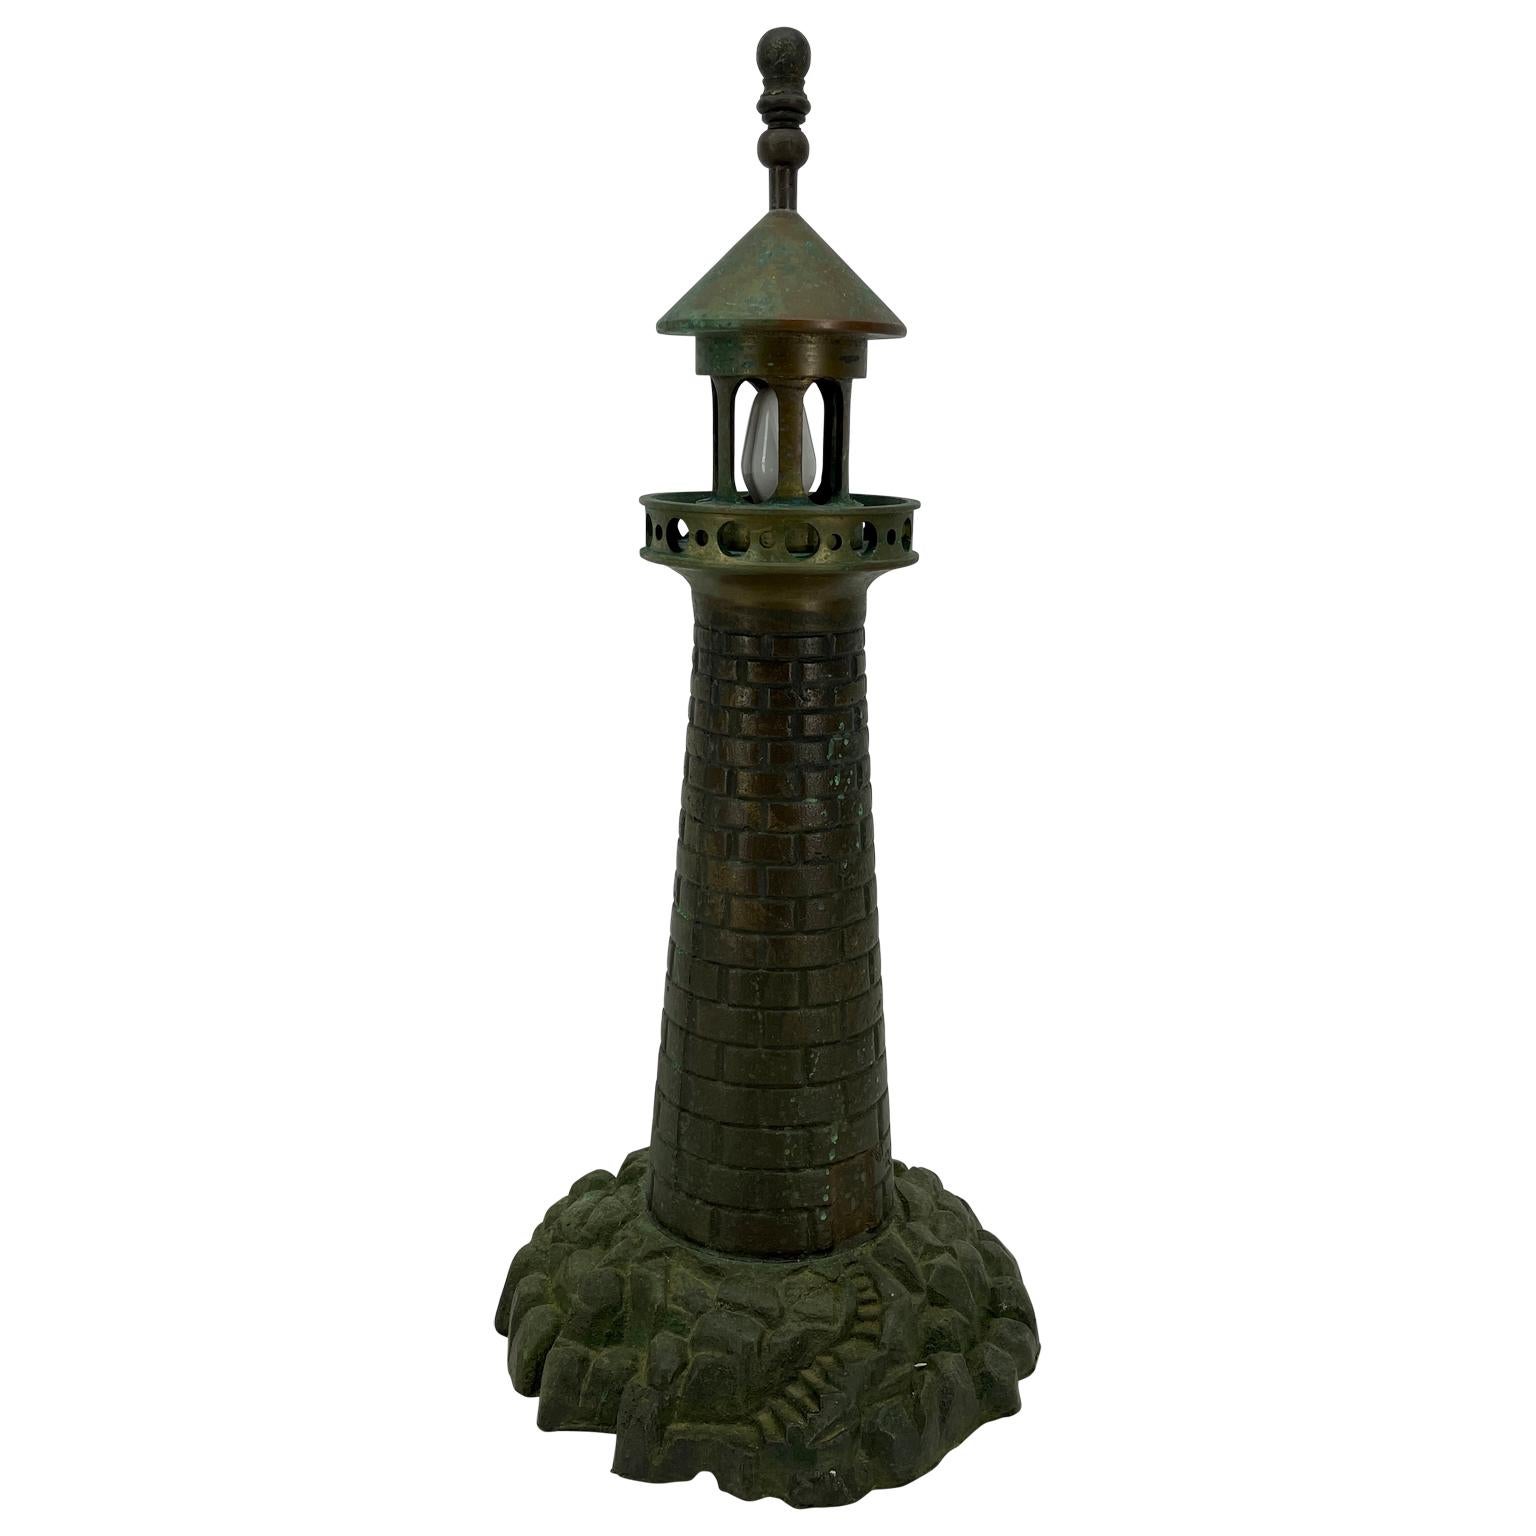 Mid-Century Modern cast iron lighthouse table lamp. This lamp is a beautiful rendering of a classic lighthouse. It's green patina is soothing; beautifully carved and quite sturdy, this lighthouse will glow in any decor.